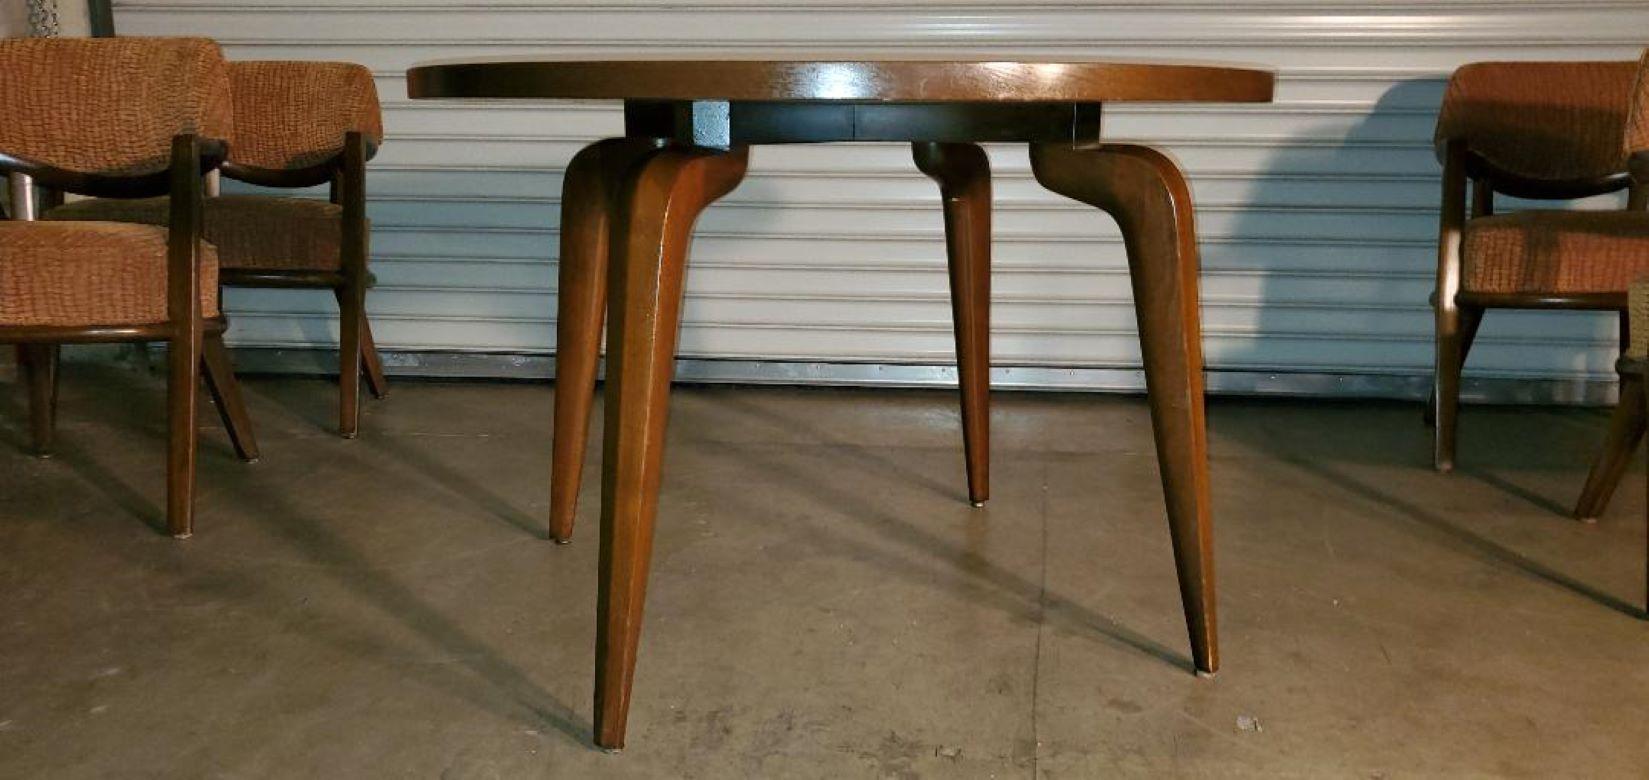 RARE 1950s Maurice Bailey Monteverdi Young Card Table & 4 Maurice Bailey Chairs For Sale 1